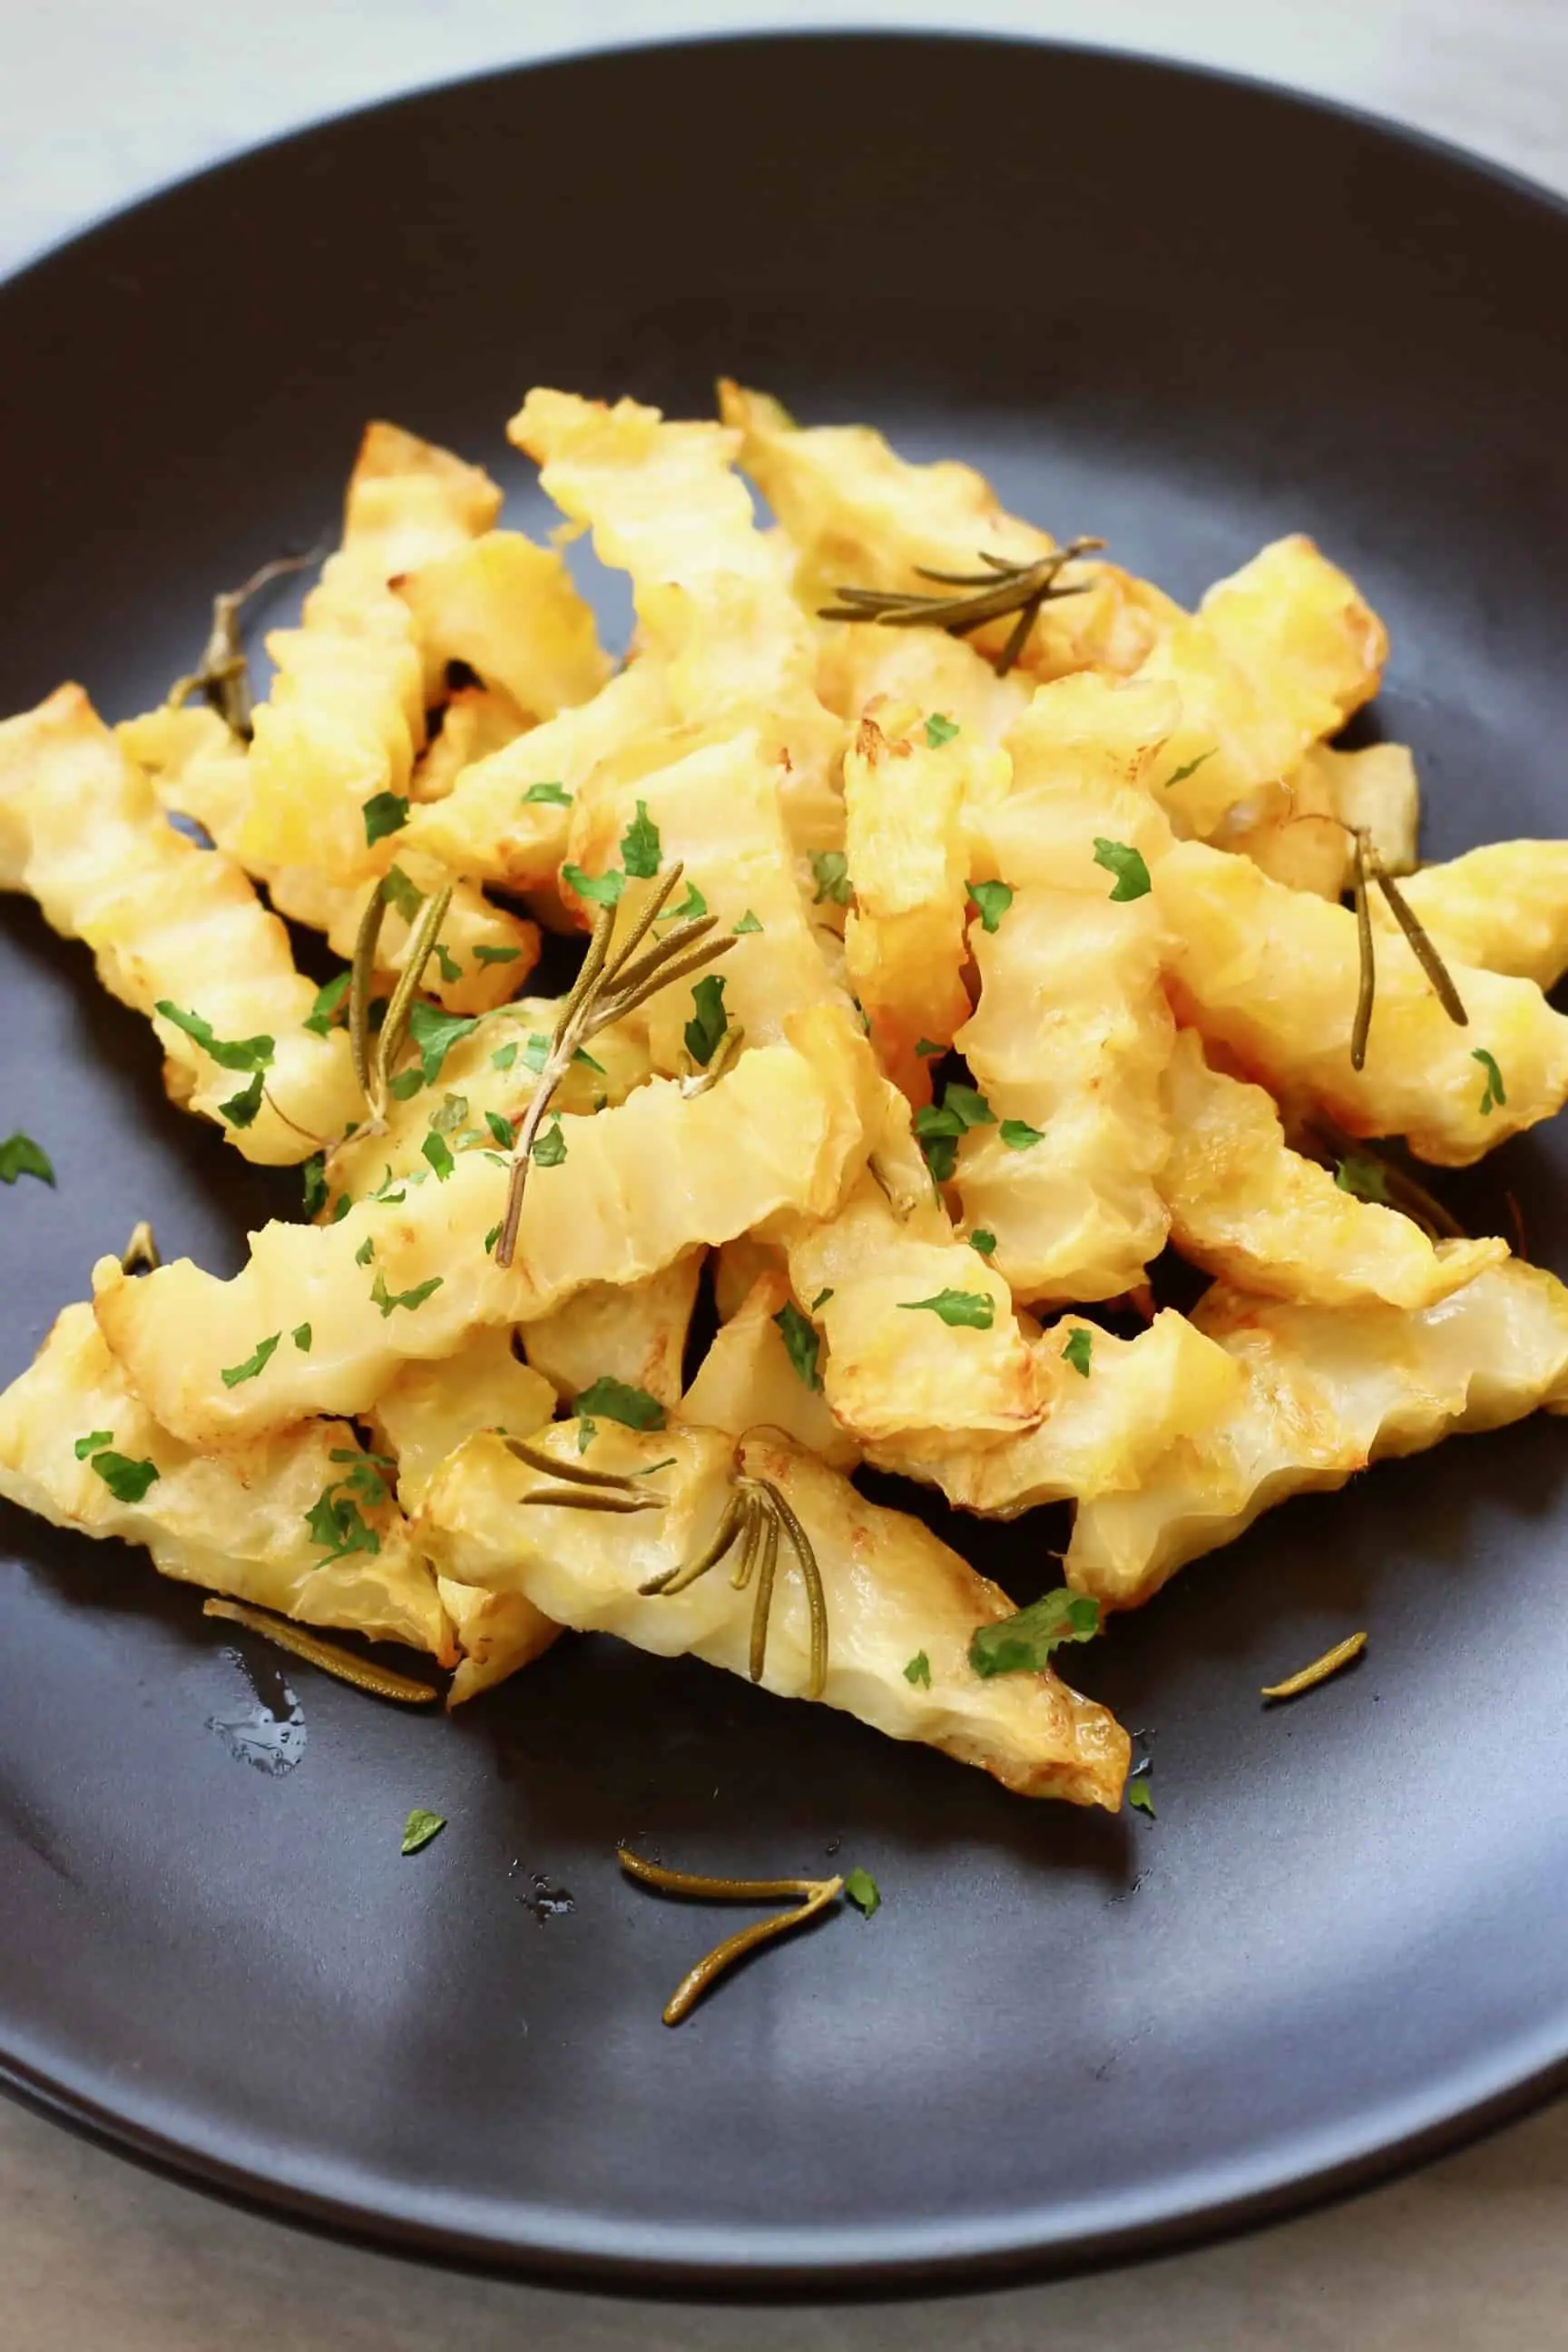 A pile of crinkle-cut celeriac fries decorated with green herbs on a black plate